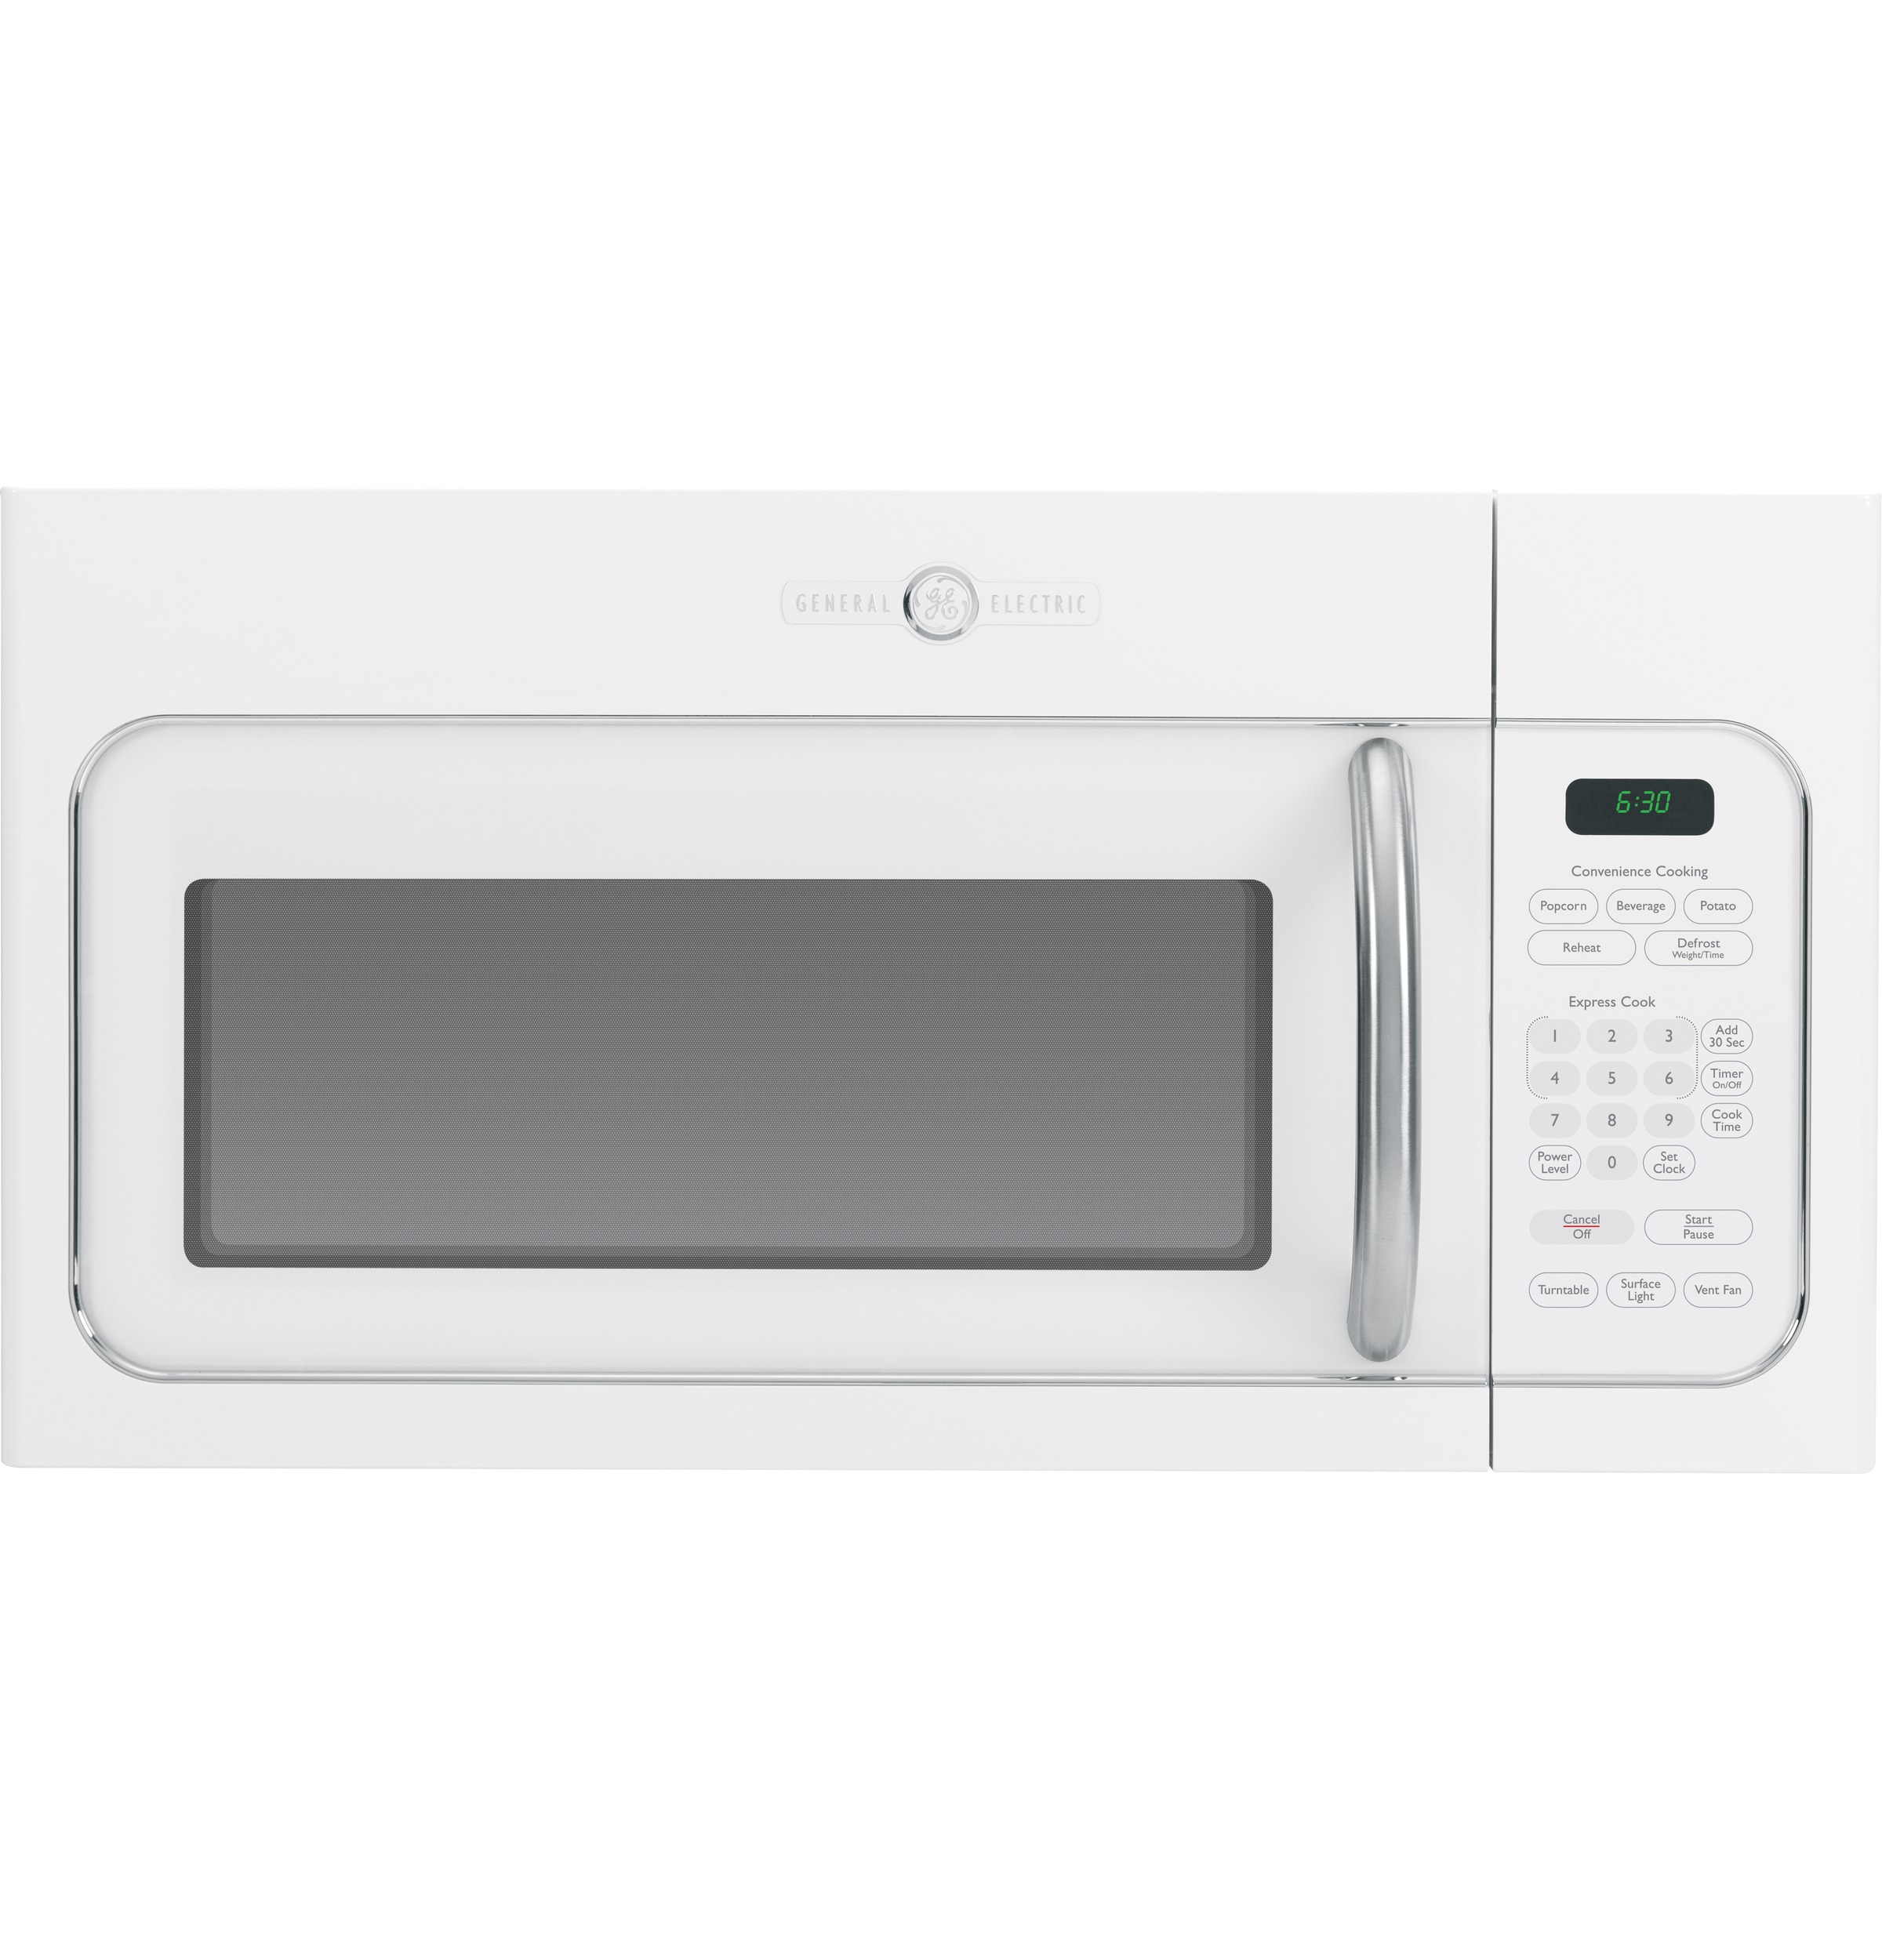 GE Artistry™ Series 1.6 Cu. Ft. Over-the-Range Microwave Oven